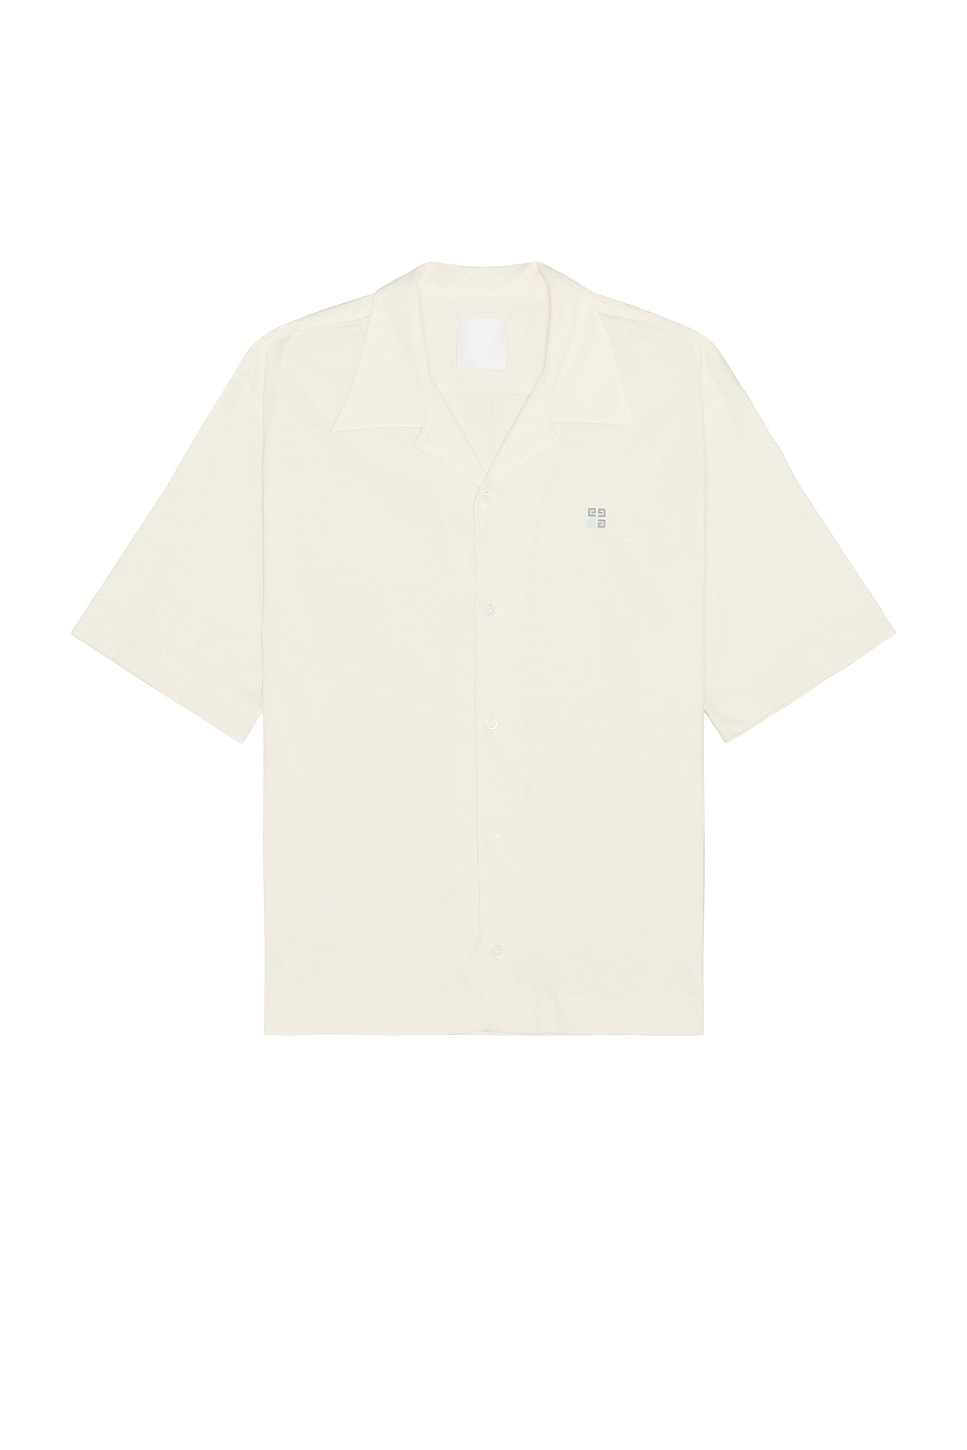 Image 1 of Givenchy New Bowling Shirt in Ivory